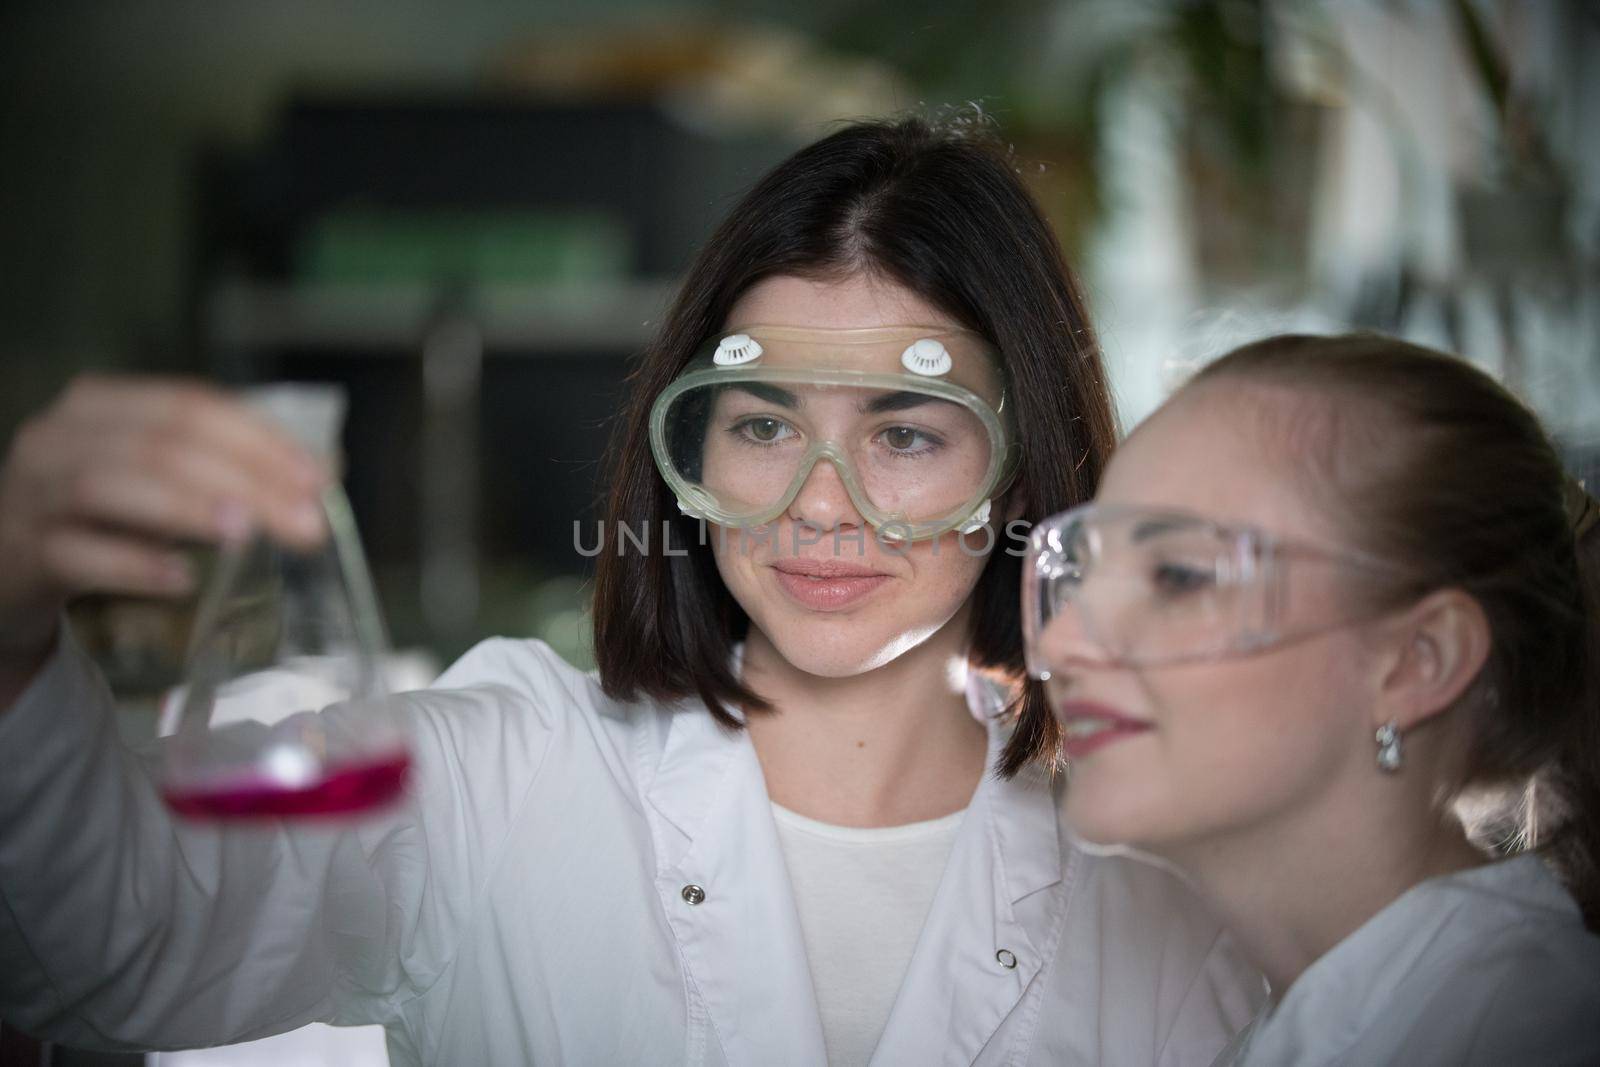 Chemical laboratory. Two young woman holding a flask with pink liquid in it, smiling. Close up